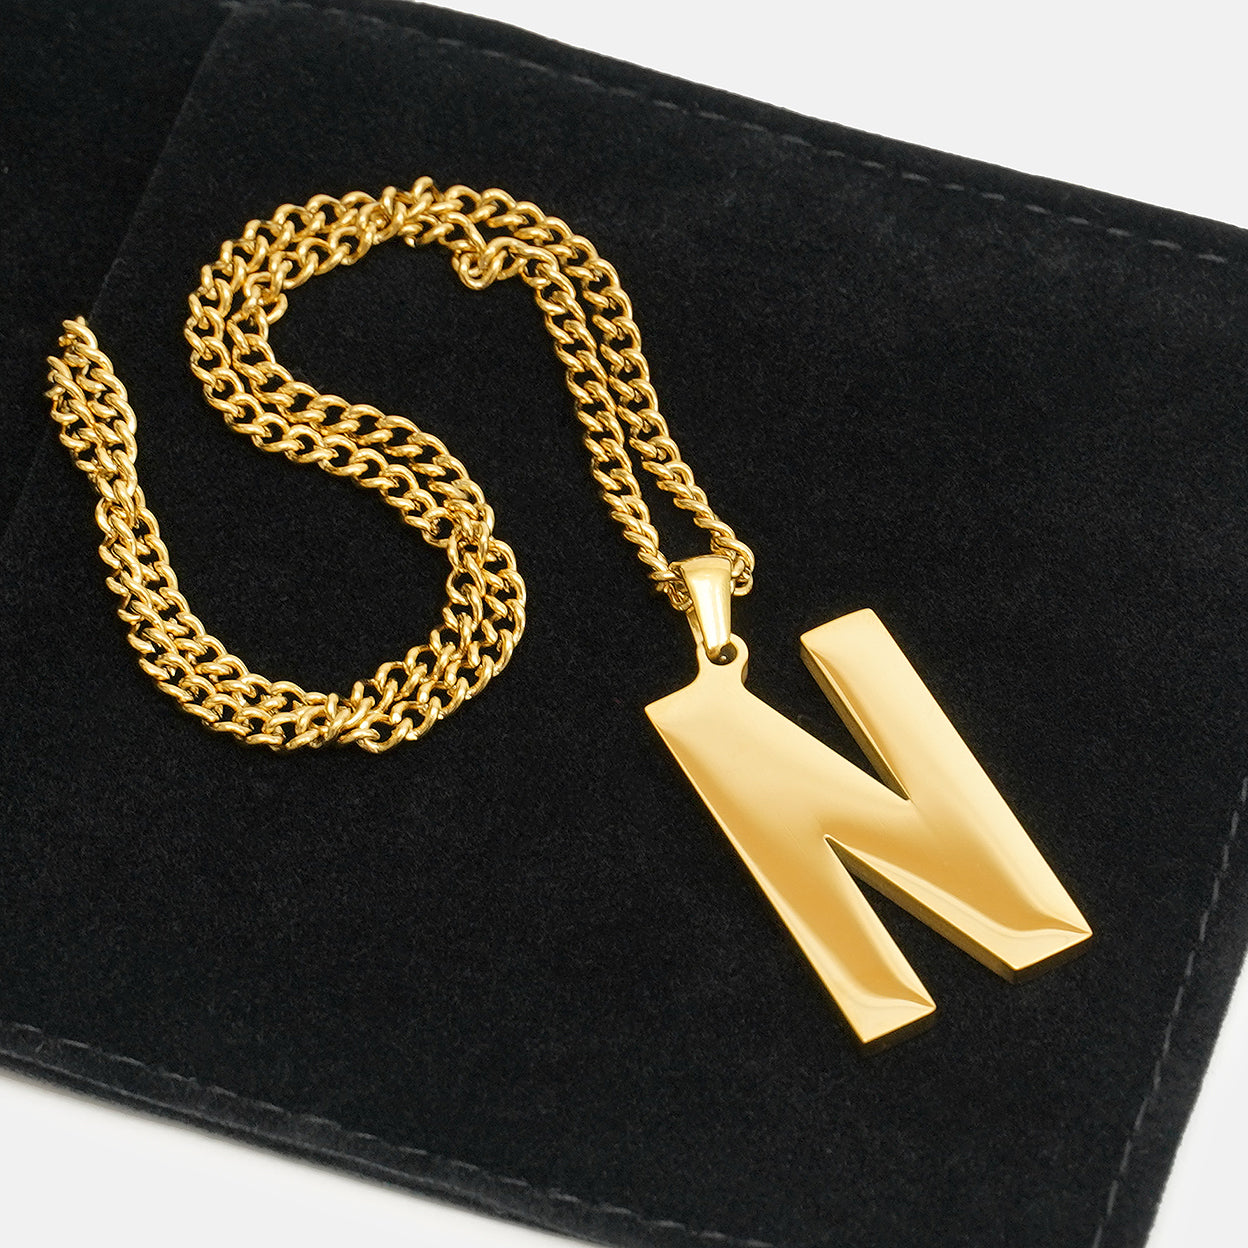 N Letter Pendant with Chain Necklace - Gold Plated Stainless Steel